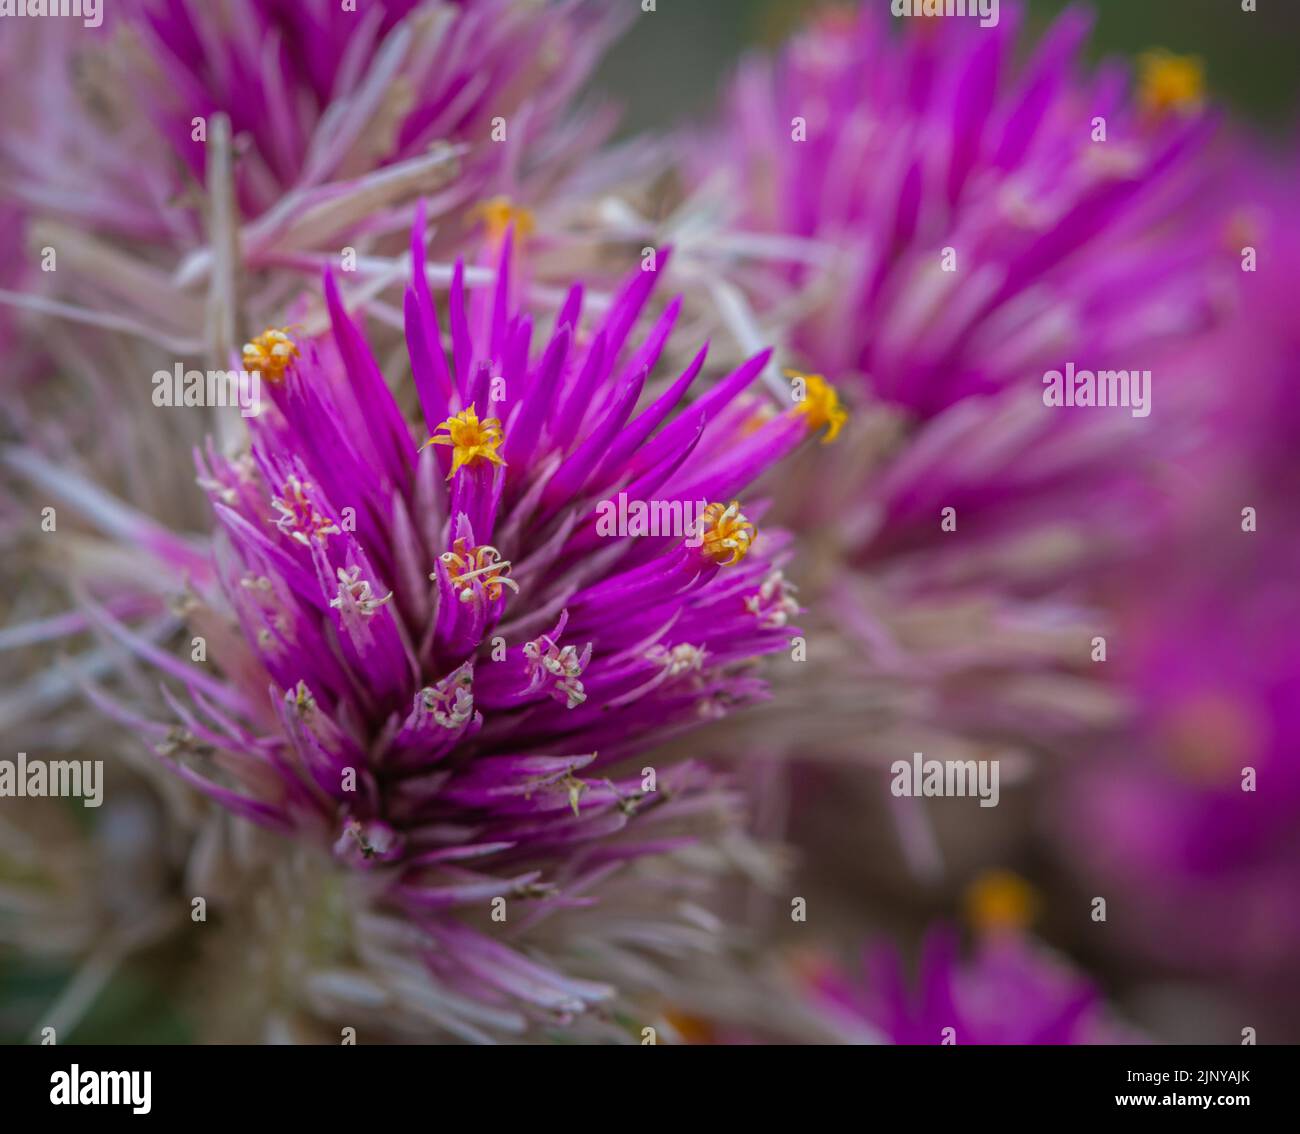 Gomphrena pulchella, bursting with two sparkling pink flower clusters. Stock Photo